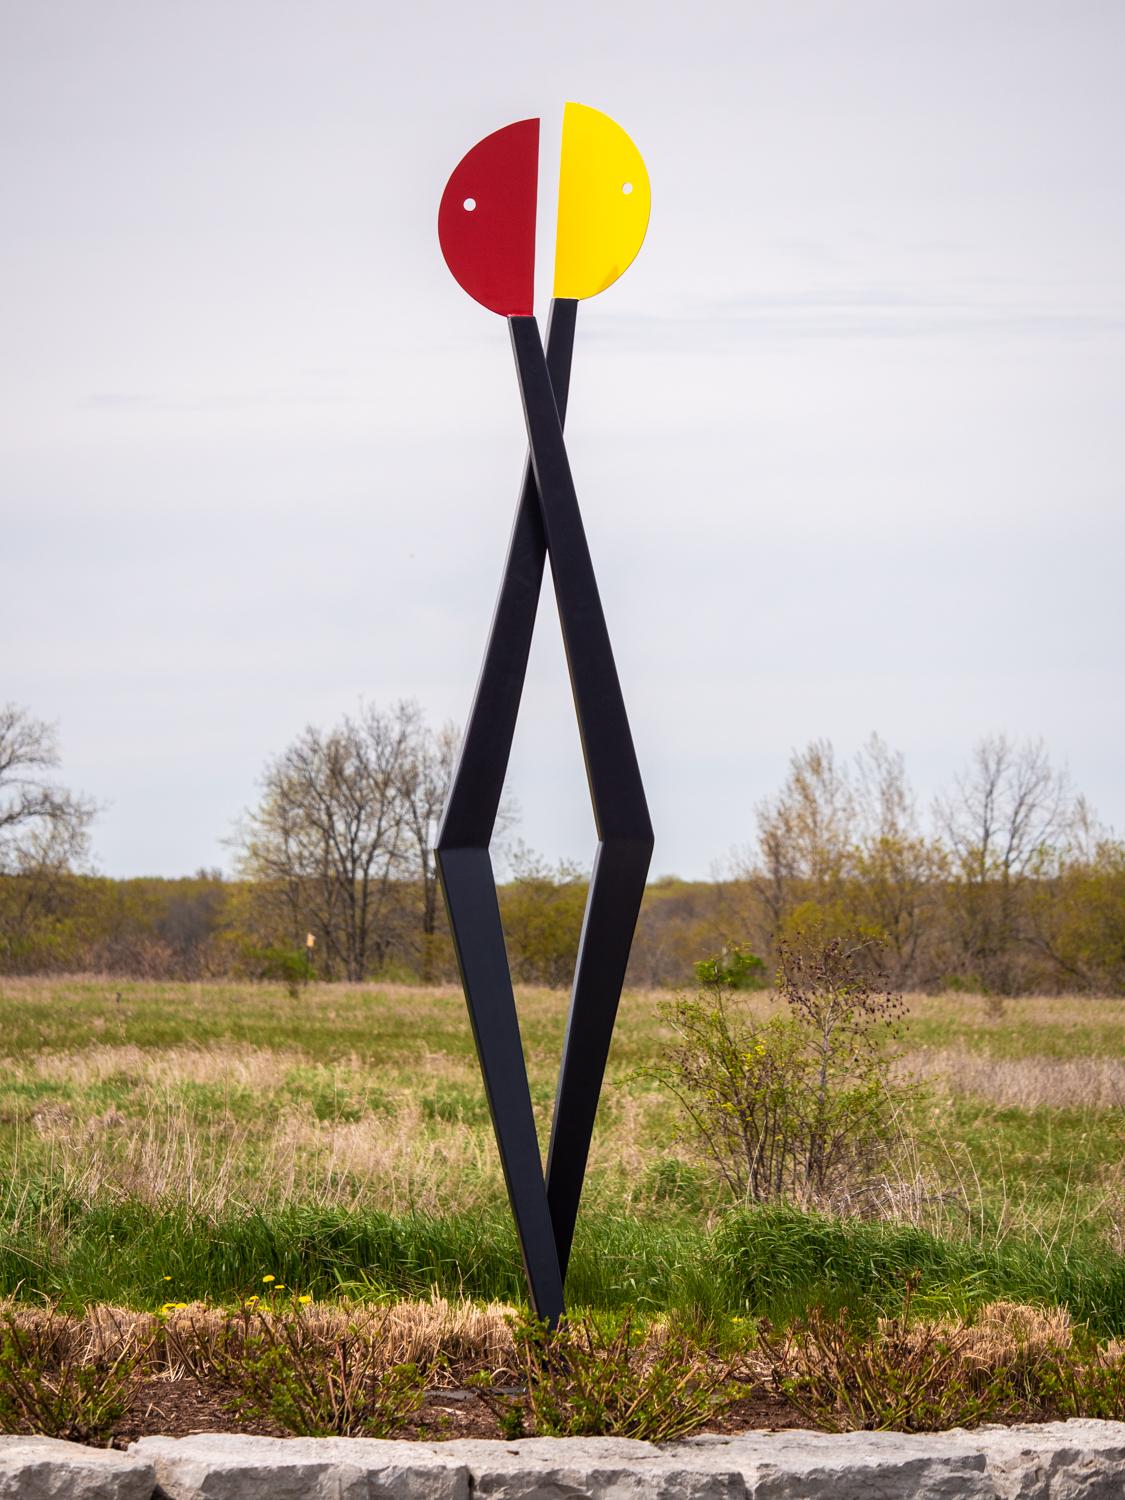 Past Conversations - colourful, playful, abstracted figures, steel sculpture - Sculpture by R. Clark Ellis